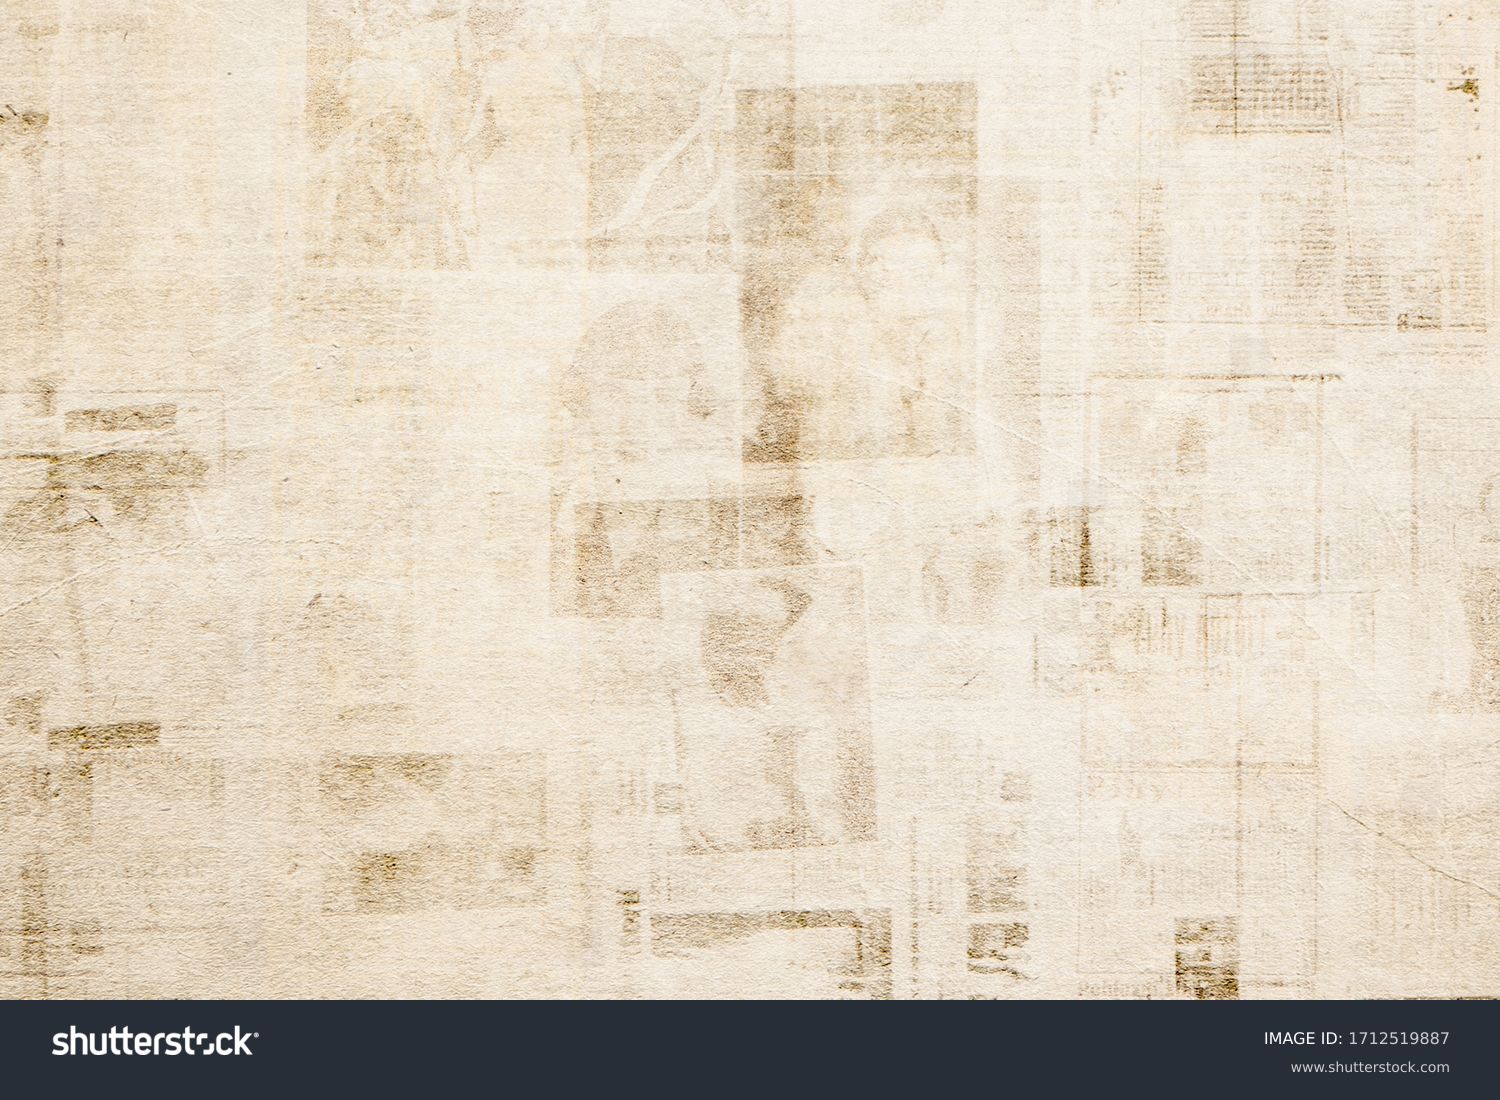 OLD NEWSPAPER BACKGROUNDS, PAPER TEXTURED PATTERN WITH OLD  NEWS PRINT #1712519887